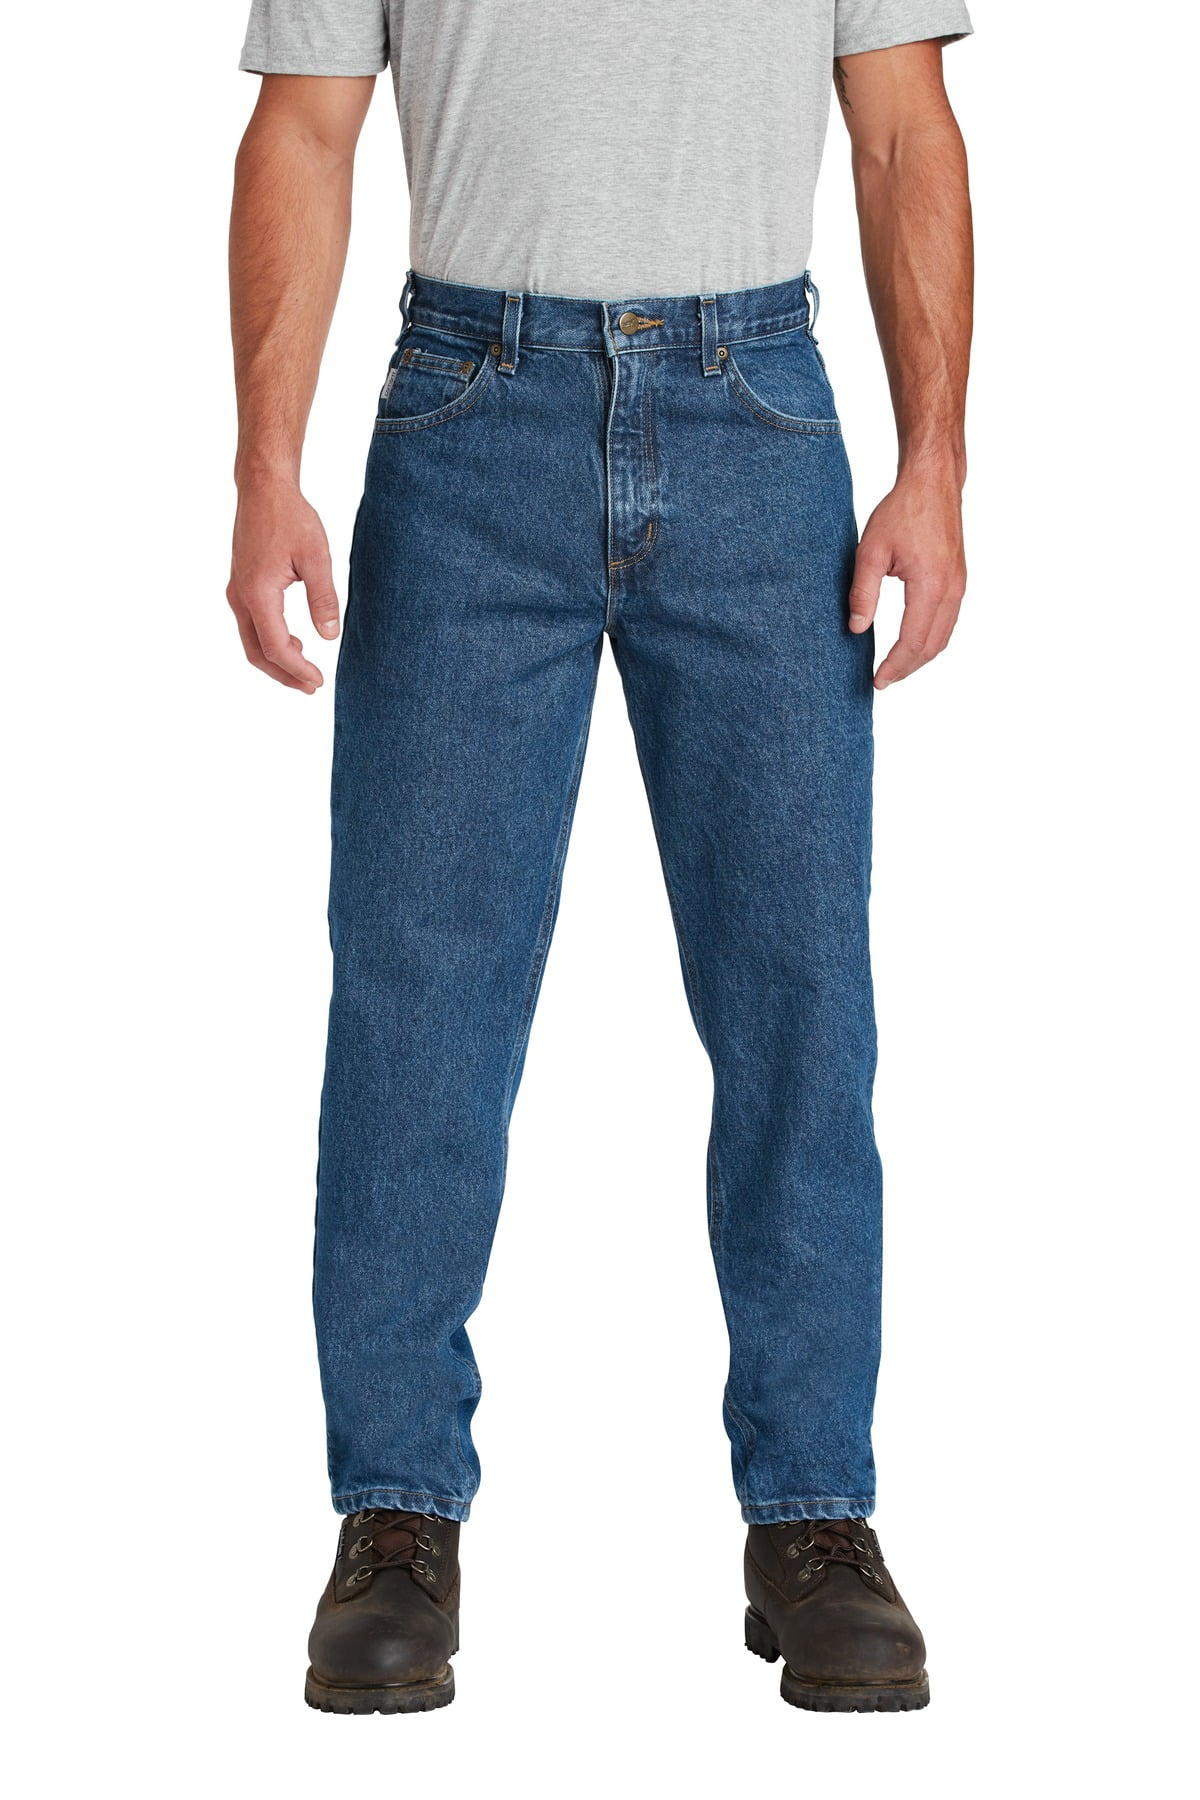 carhartt relaxed jeans